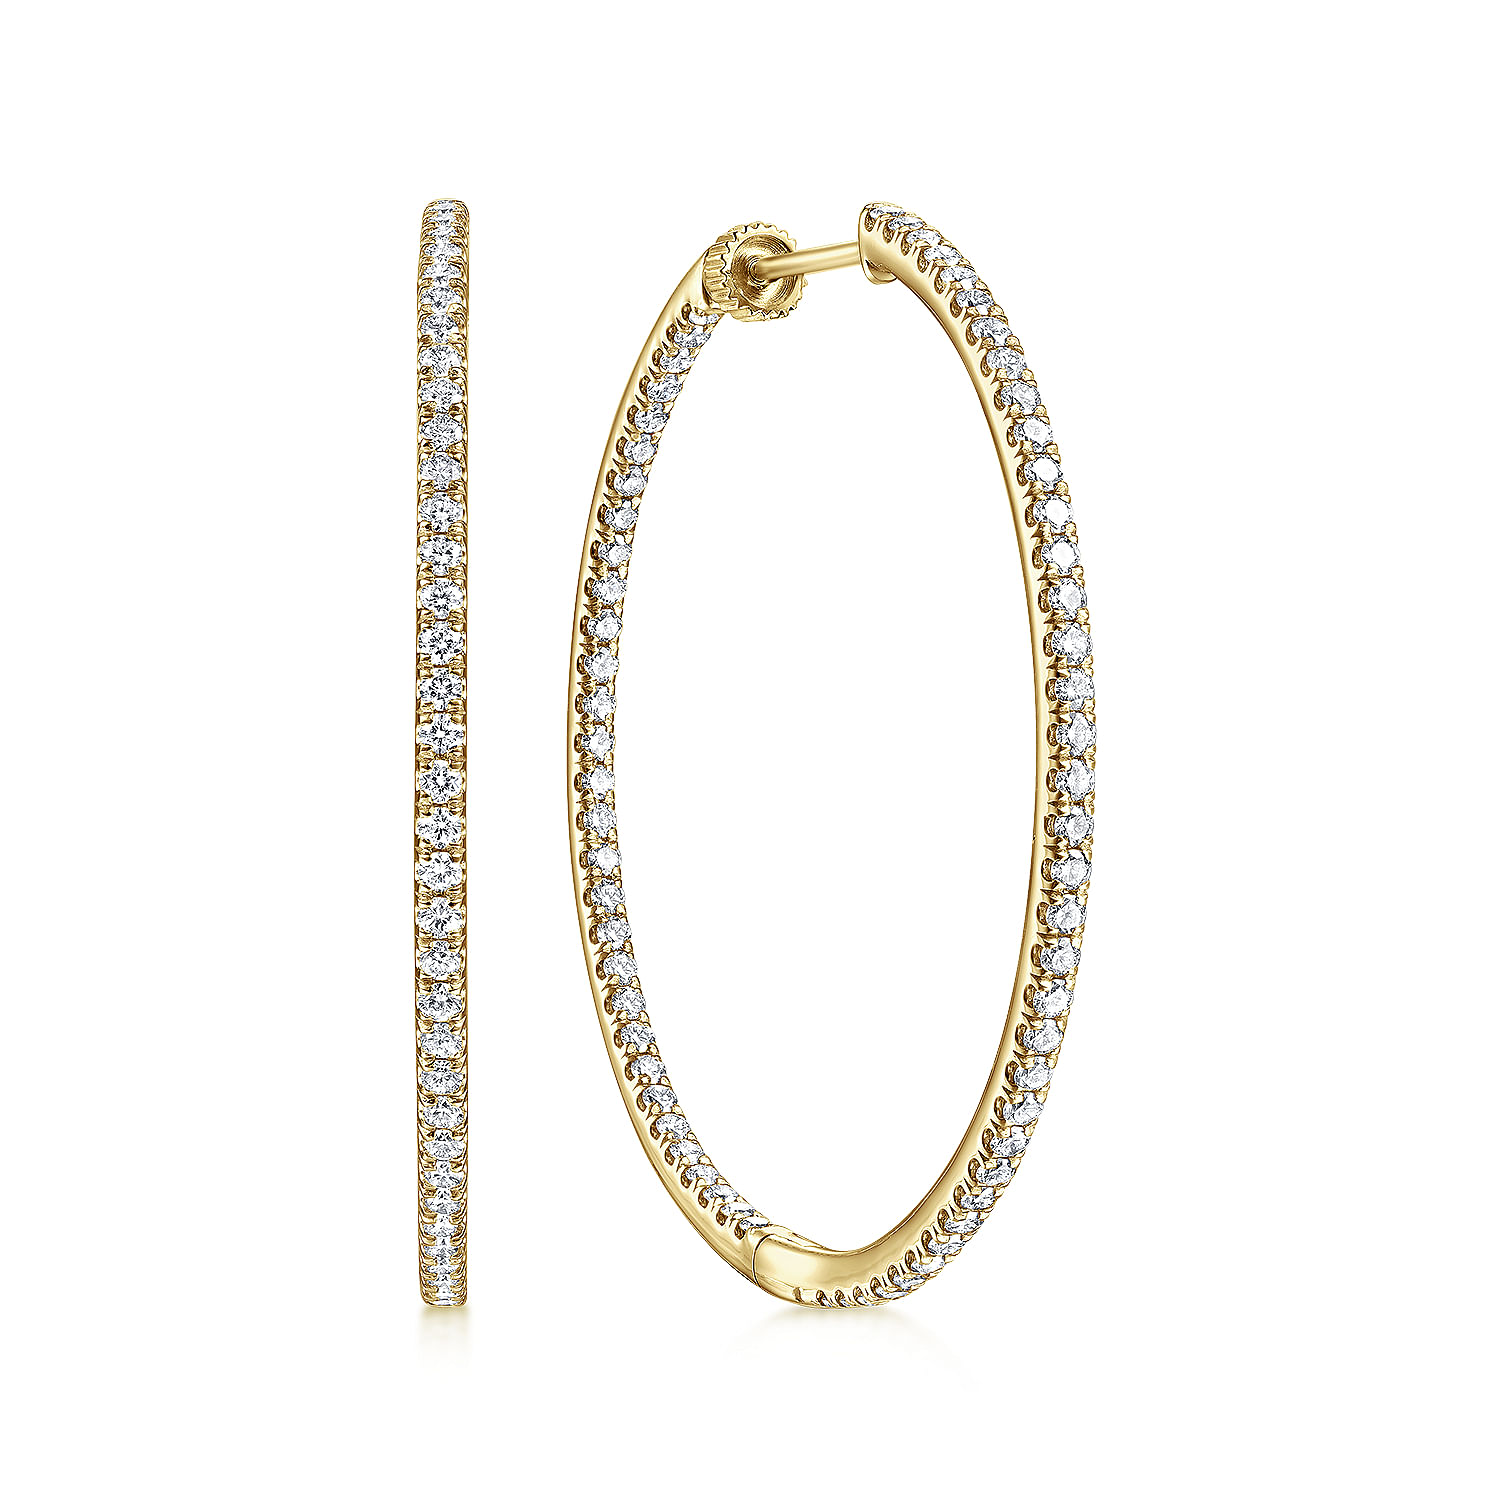 14K Yellow Gold French Pave 40mm Round Inside Out Diamond Hoop Earrings